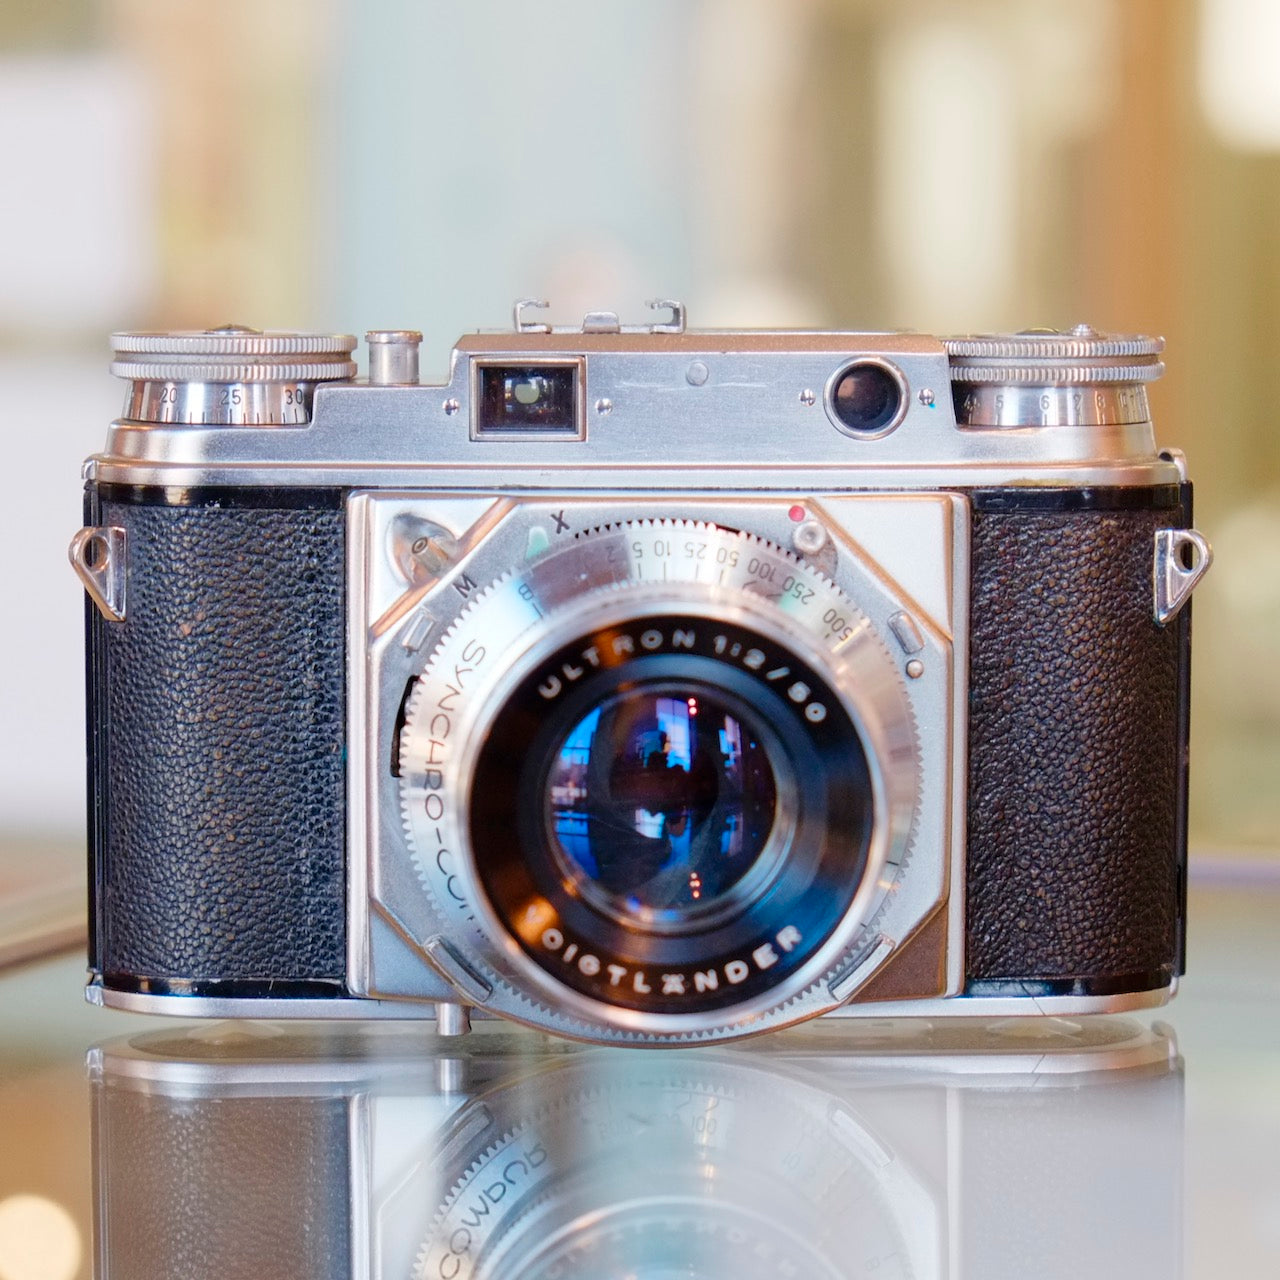 Voigtlander Prominent with 50mm f2 Ultron